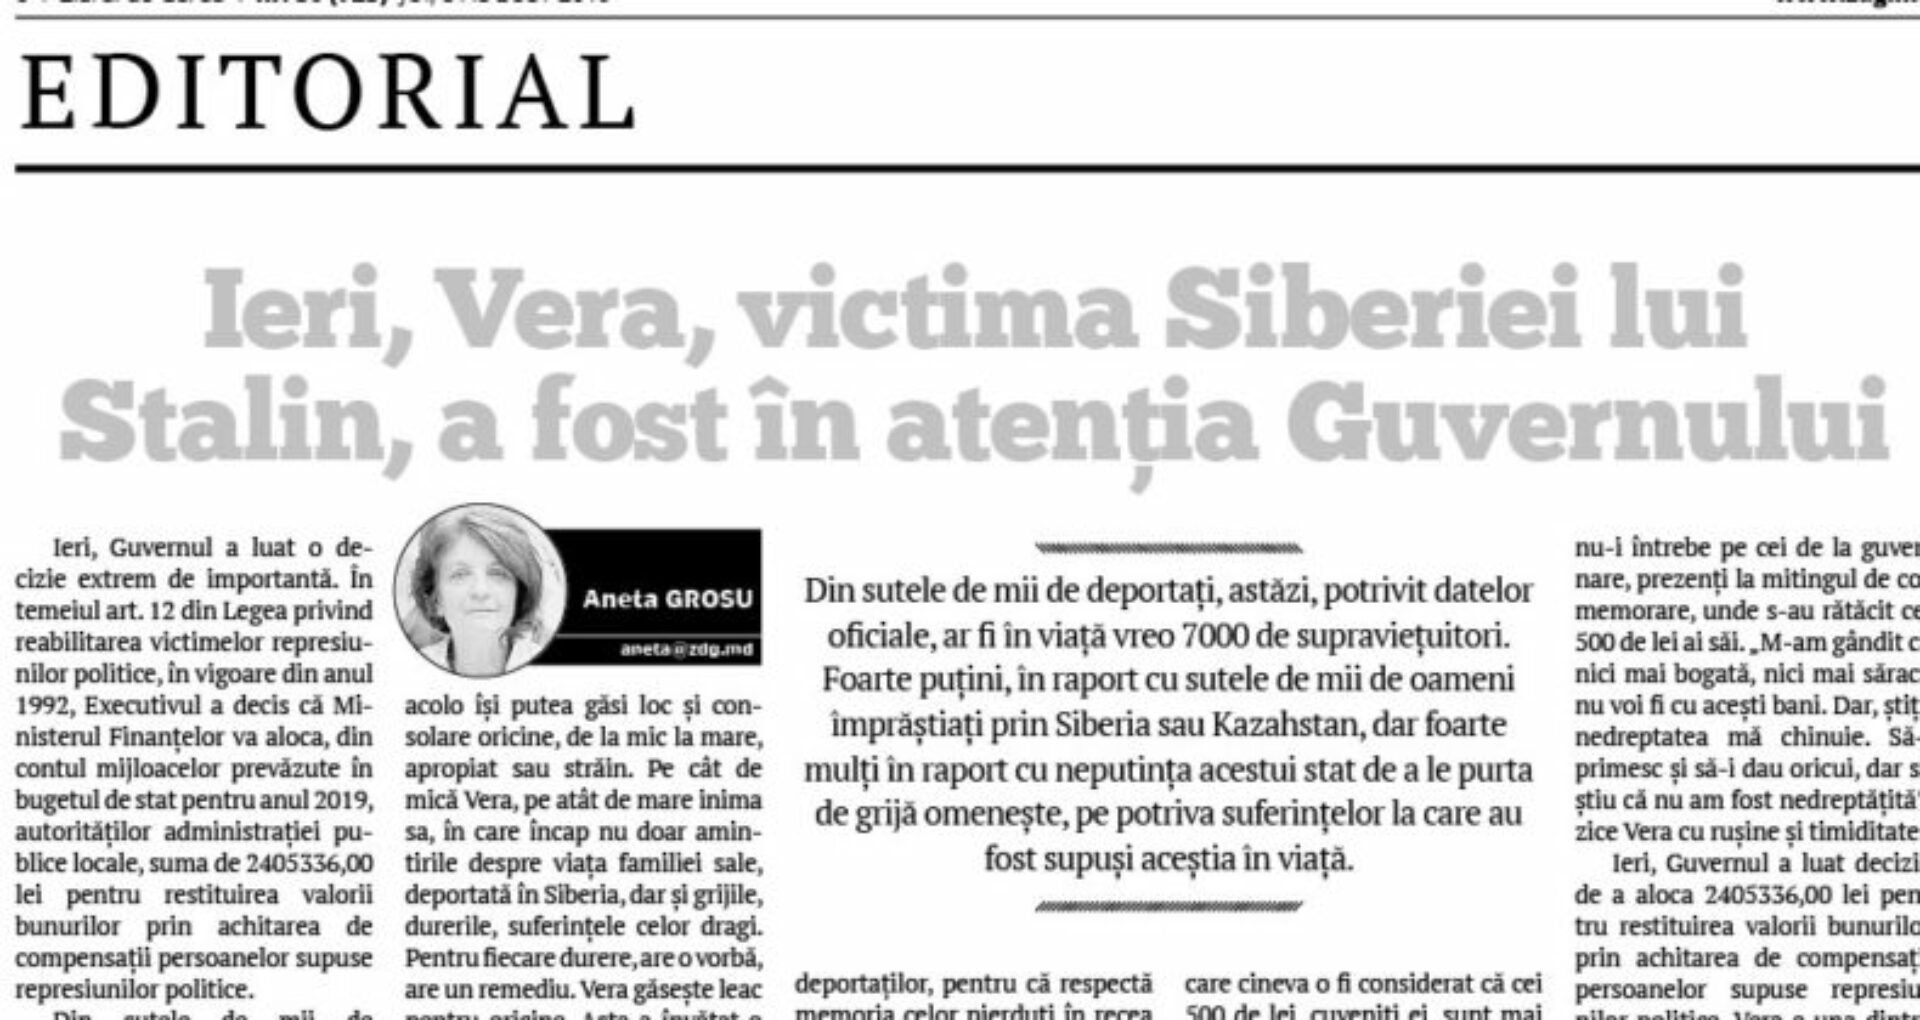 Yesterday, Stalin Era Deportee Vera Was in the Government’s Sight